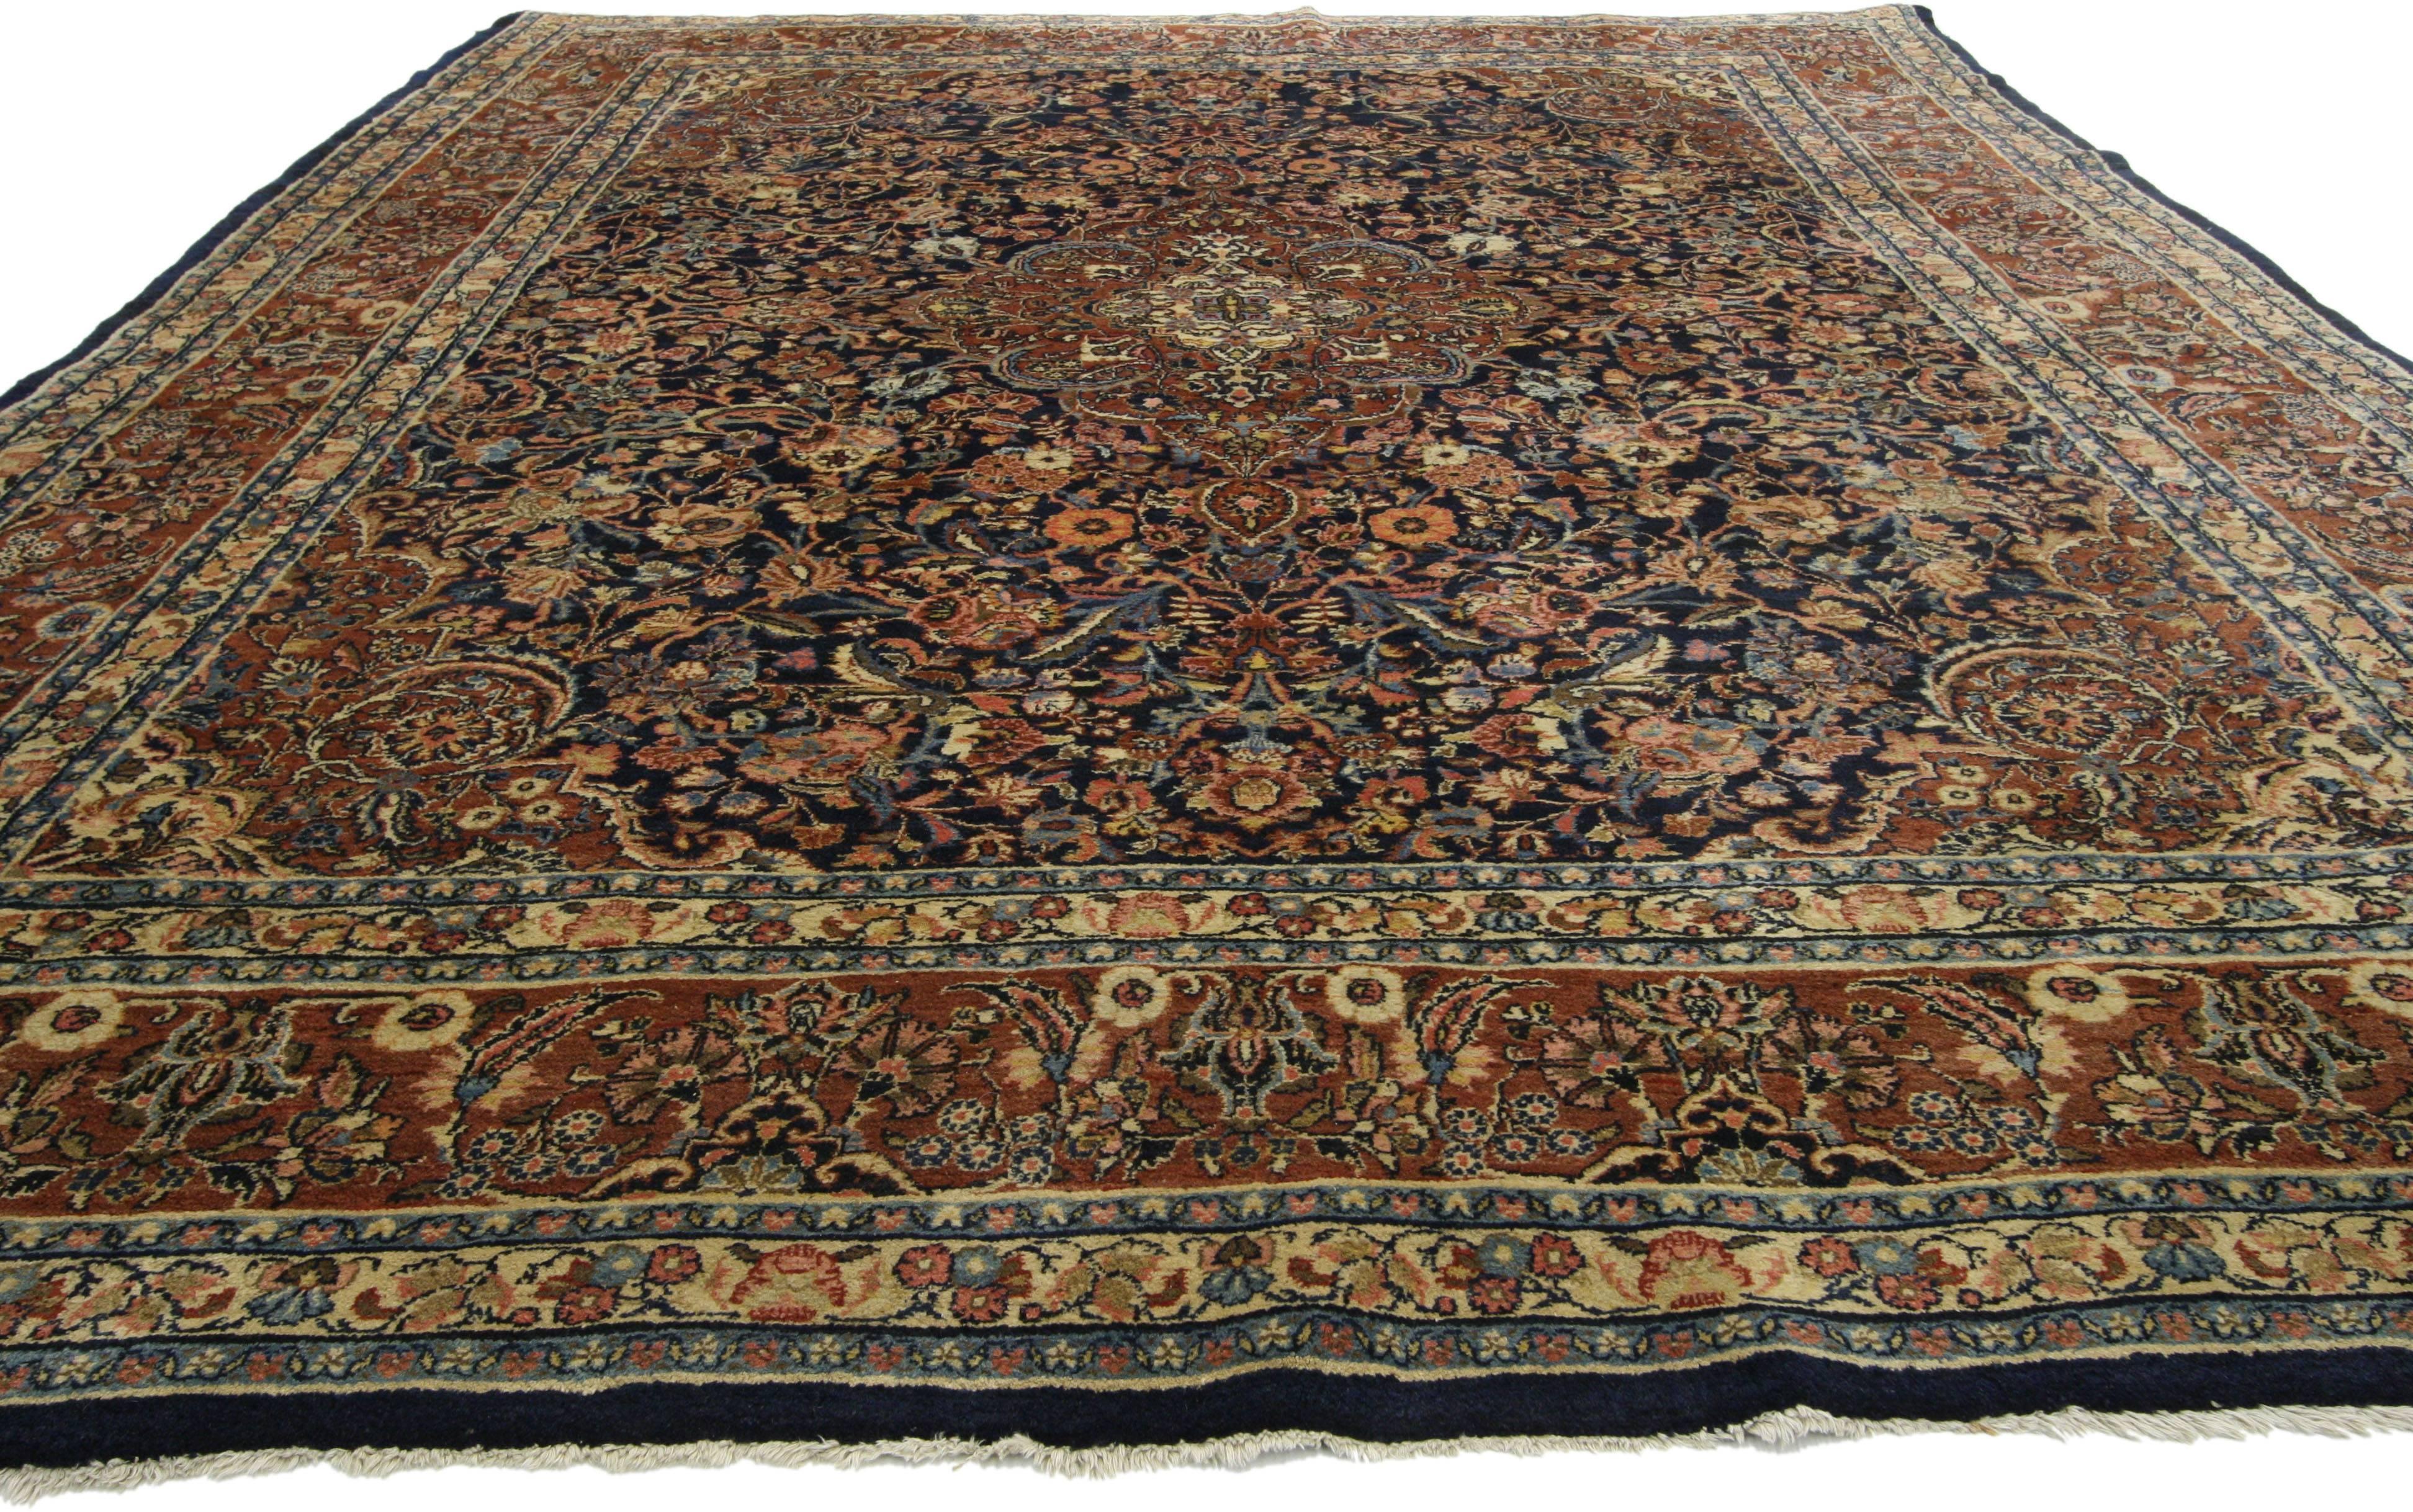 76597 Antique Persian Kashan Rug with Traditional Old World Style in Warm Colors 08'11 X 11'07. With its timeless elegance and regal charm, this hand knotted wool antique Persian Kashan rug features a sixteen point scalloped medallion anchored with